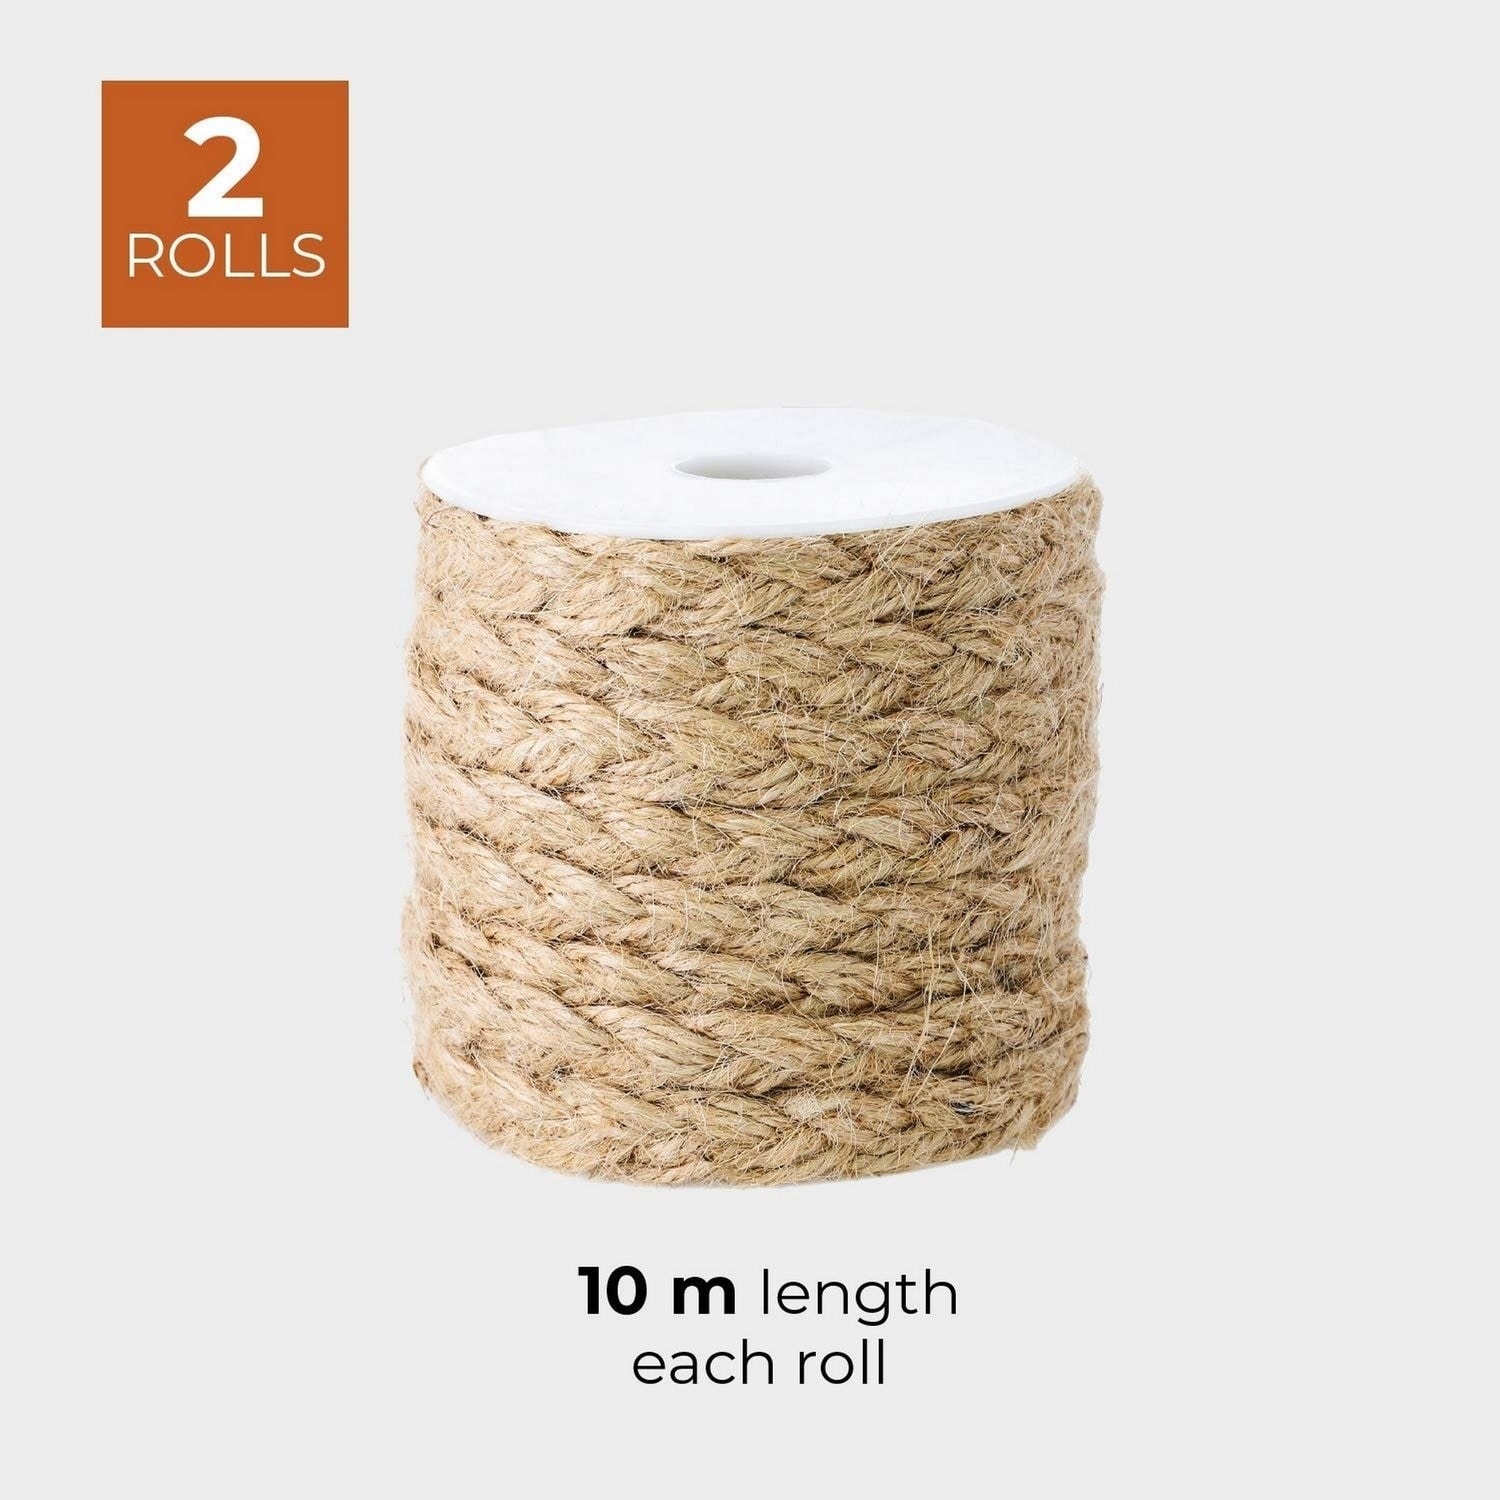 Crafter's Square Natural Jute Cord, 256-ft. Rolls